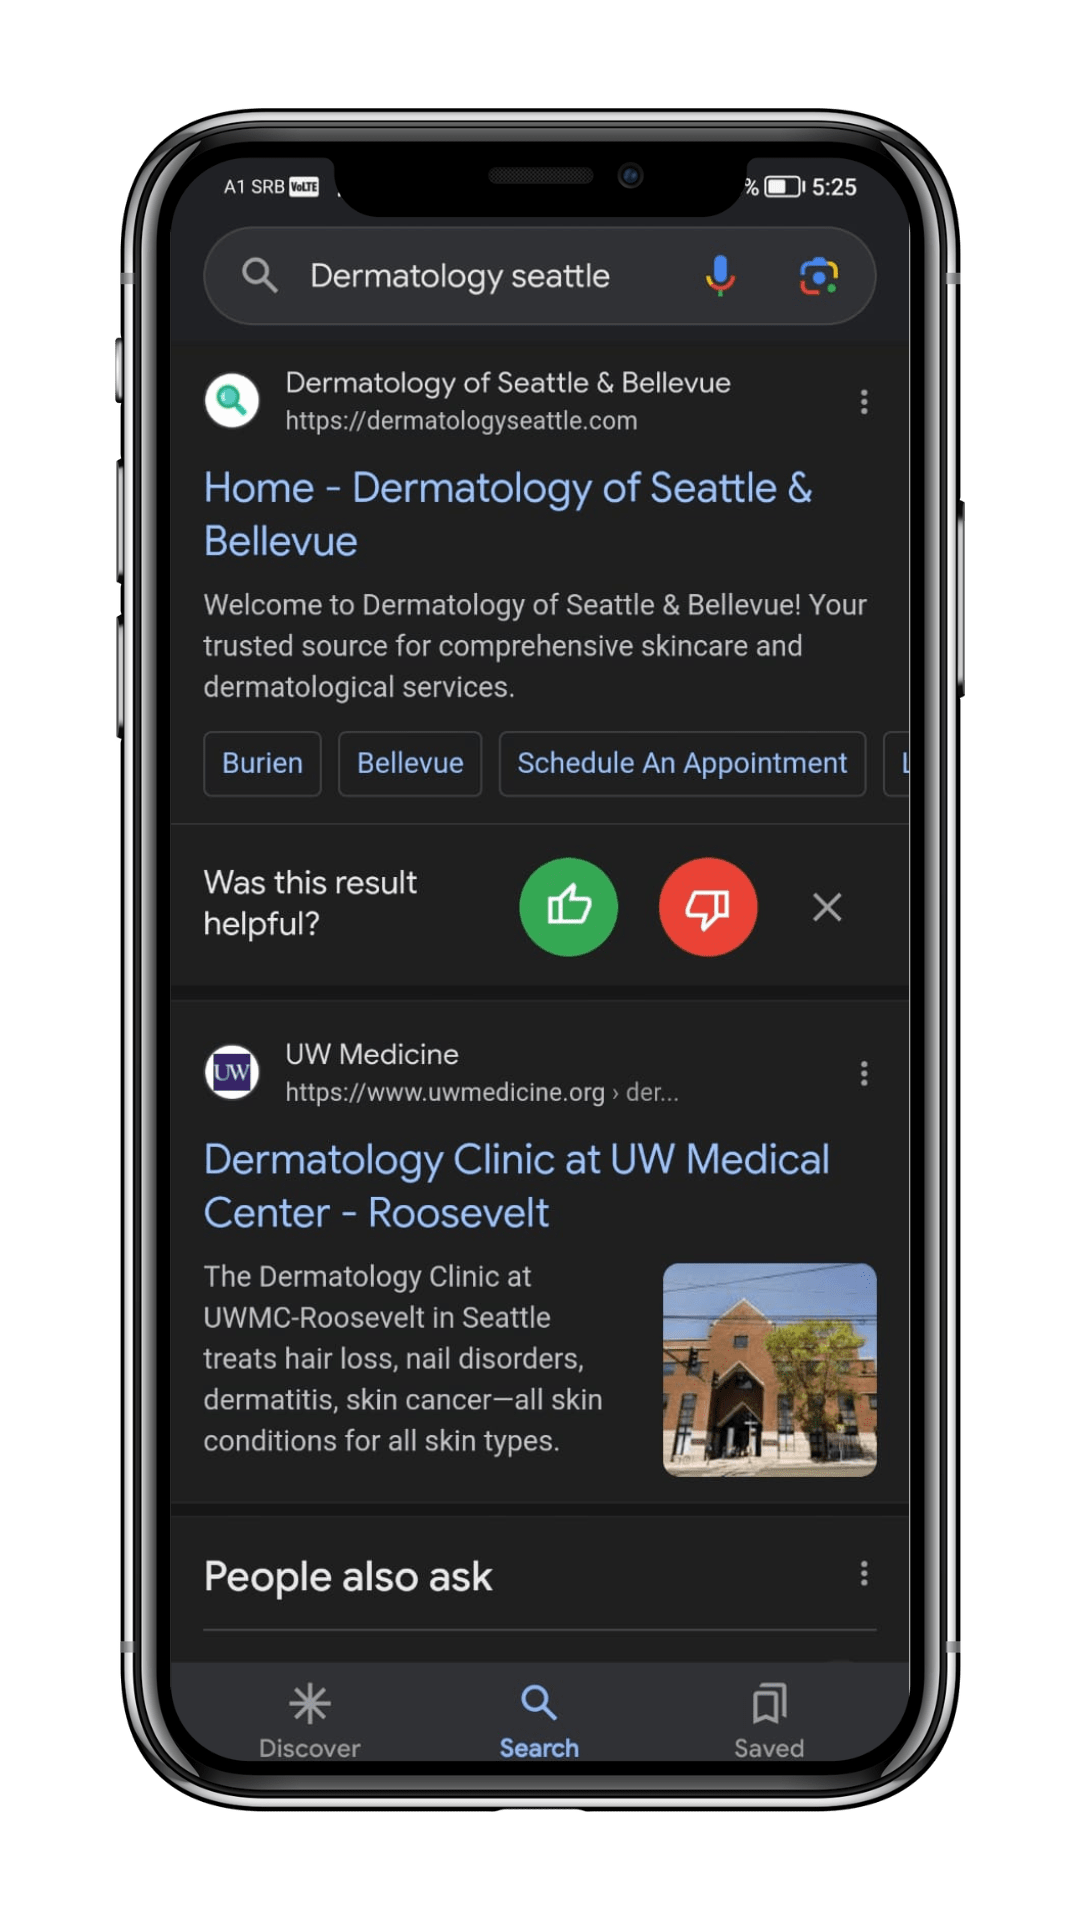 Dermatology Of Seattle & Bellevue search on Google shown on the mobile device